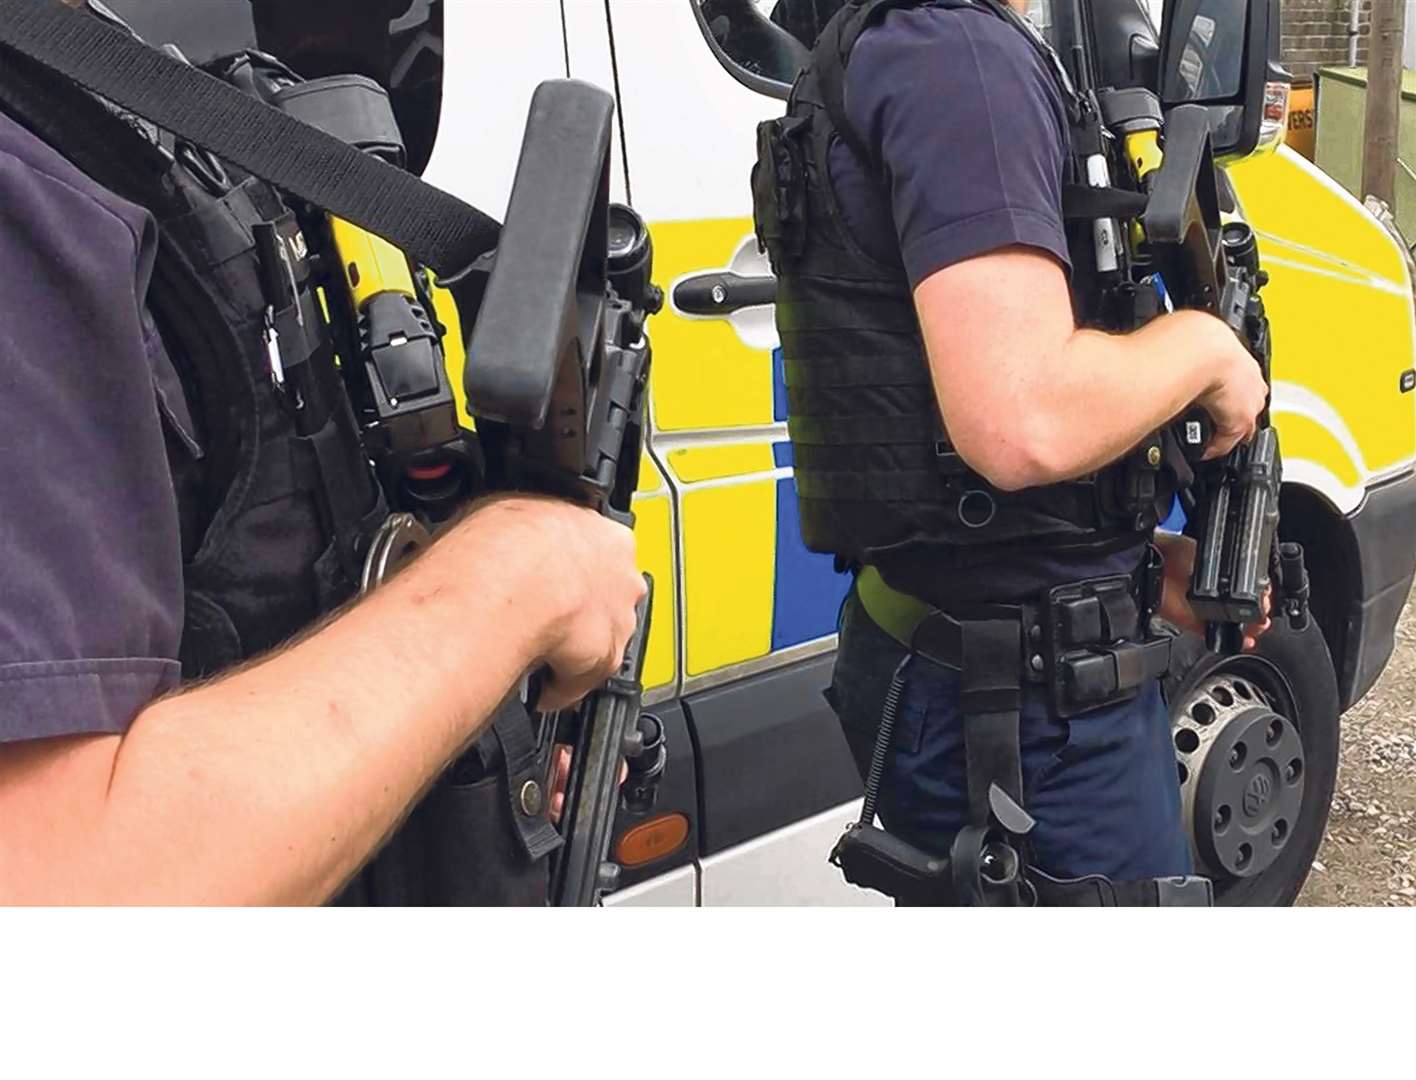 Armed police were called to the street. Stock picture